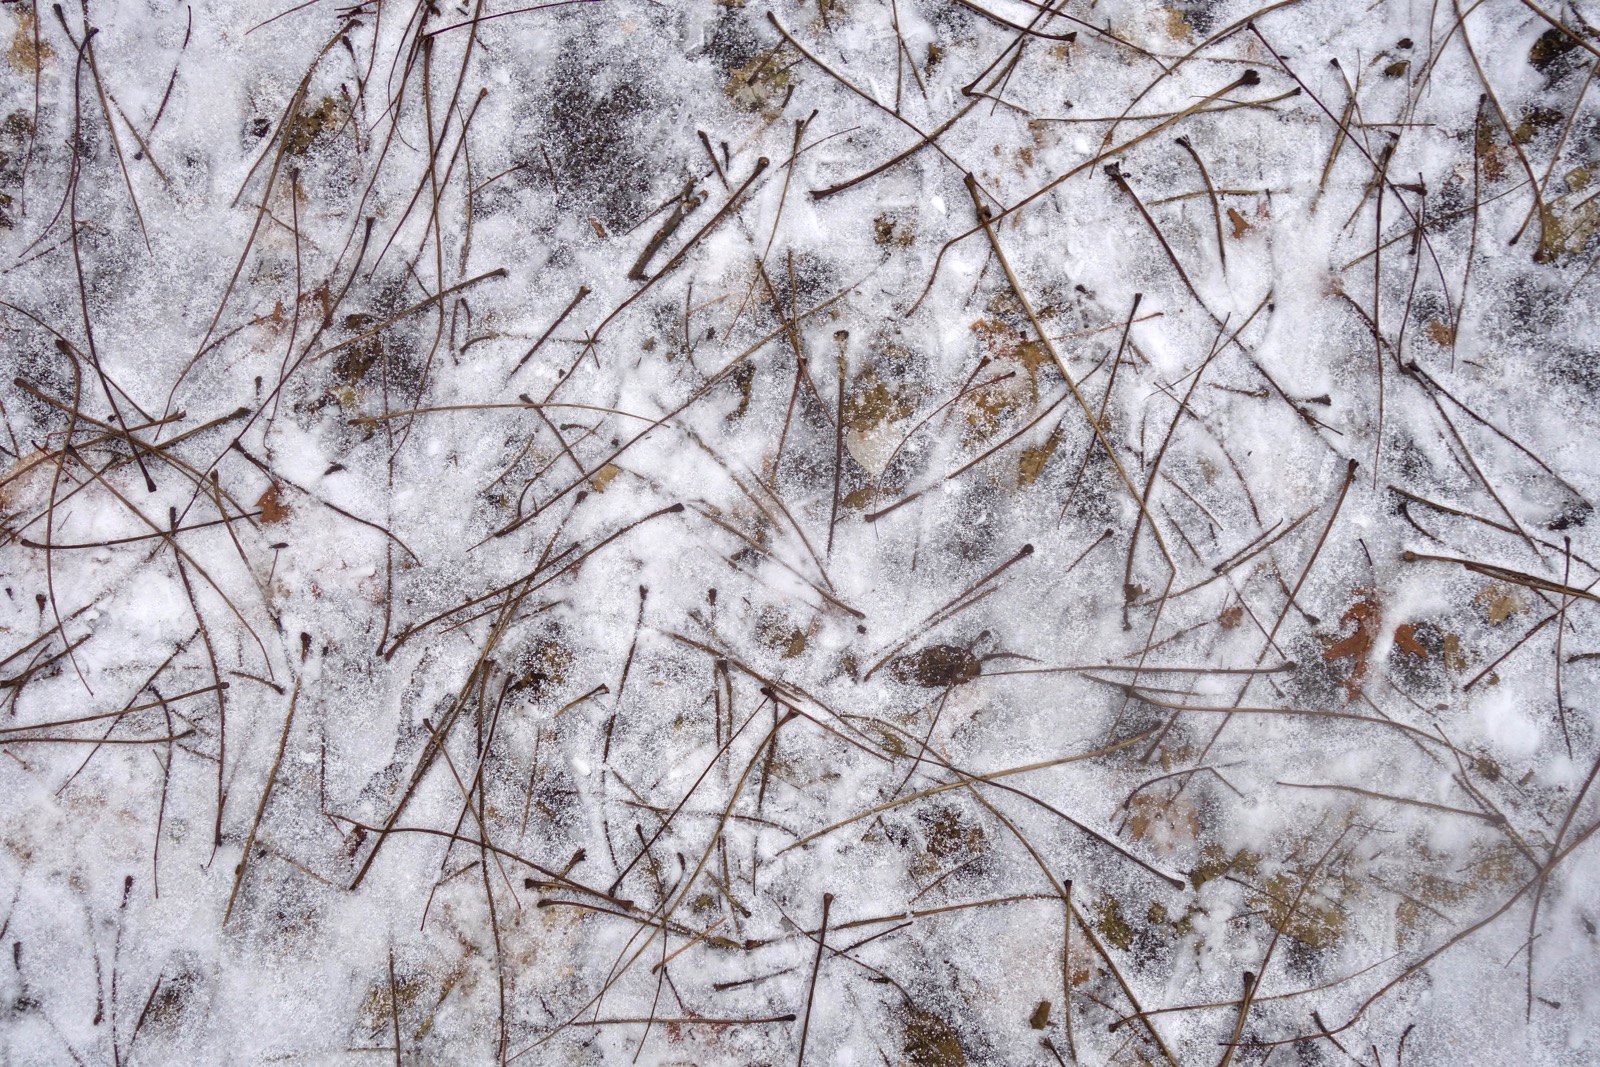 Twigs drawing on pavement with snow